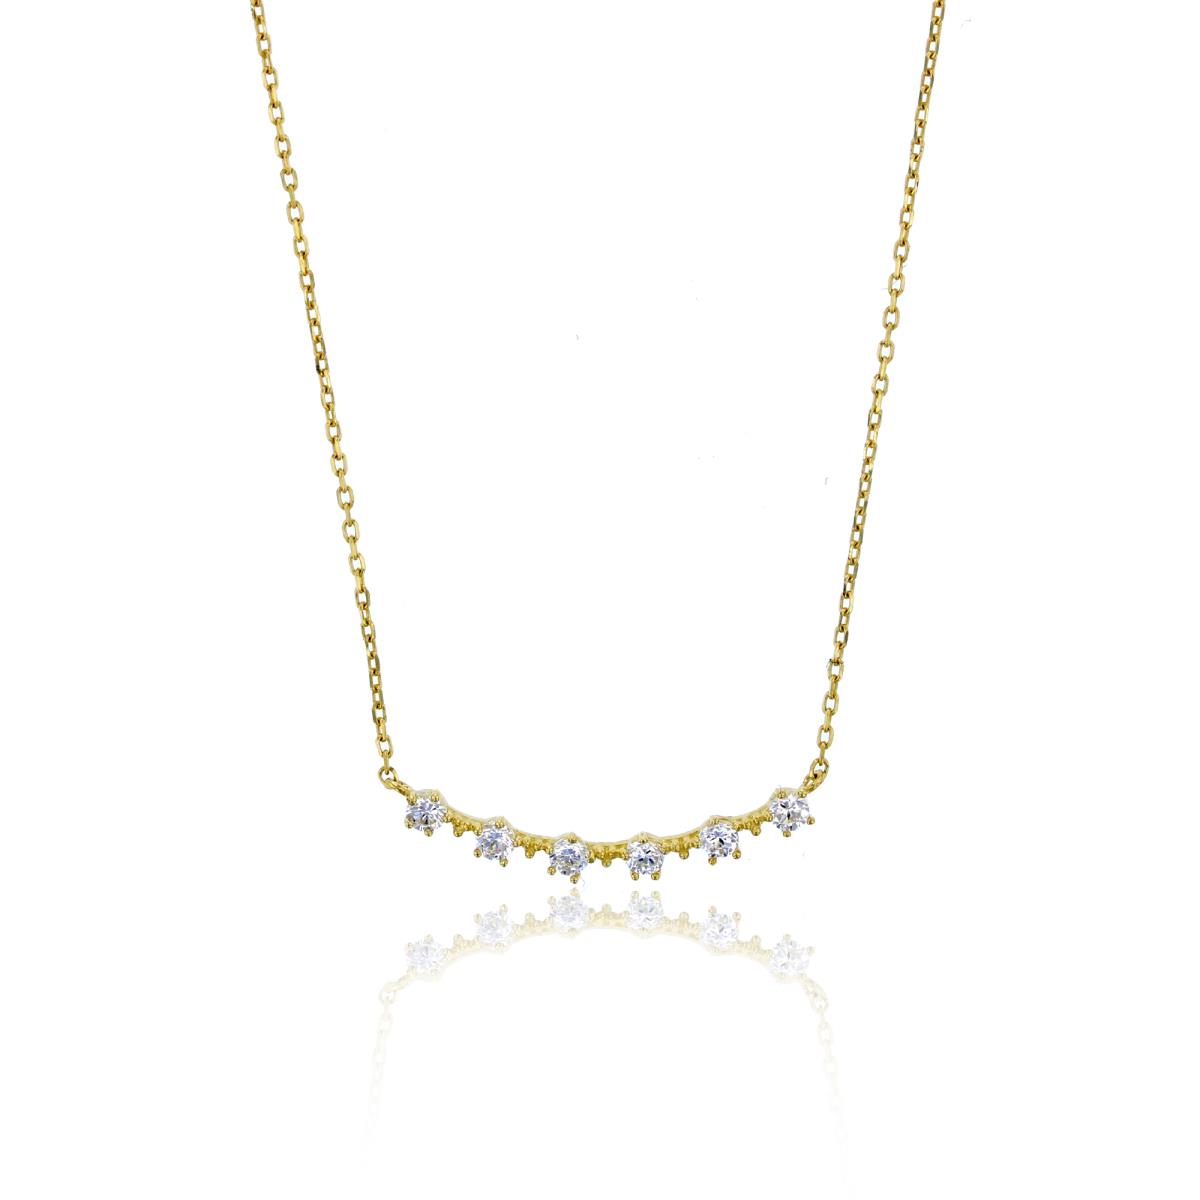 10KY Yellow Gold 18" Polished Pave 2.00mm Round Cut 6-Stone Necklace